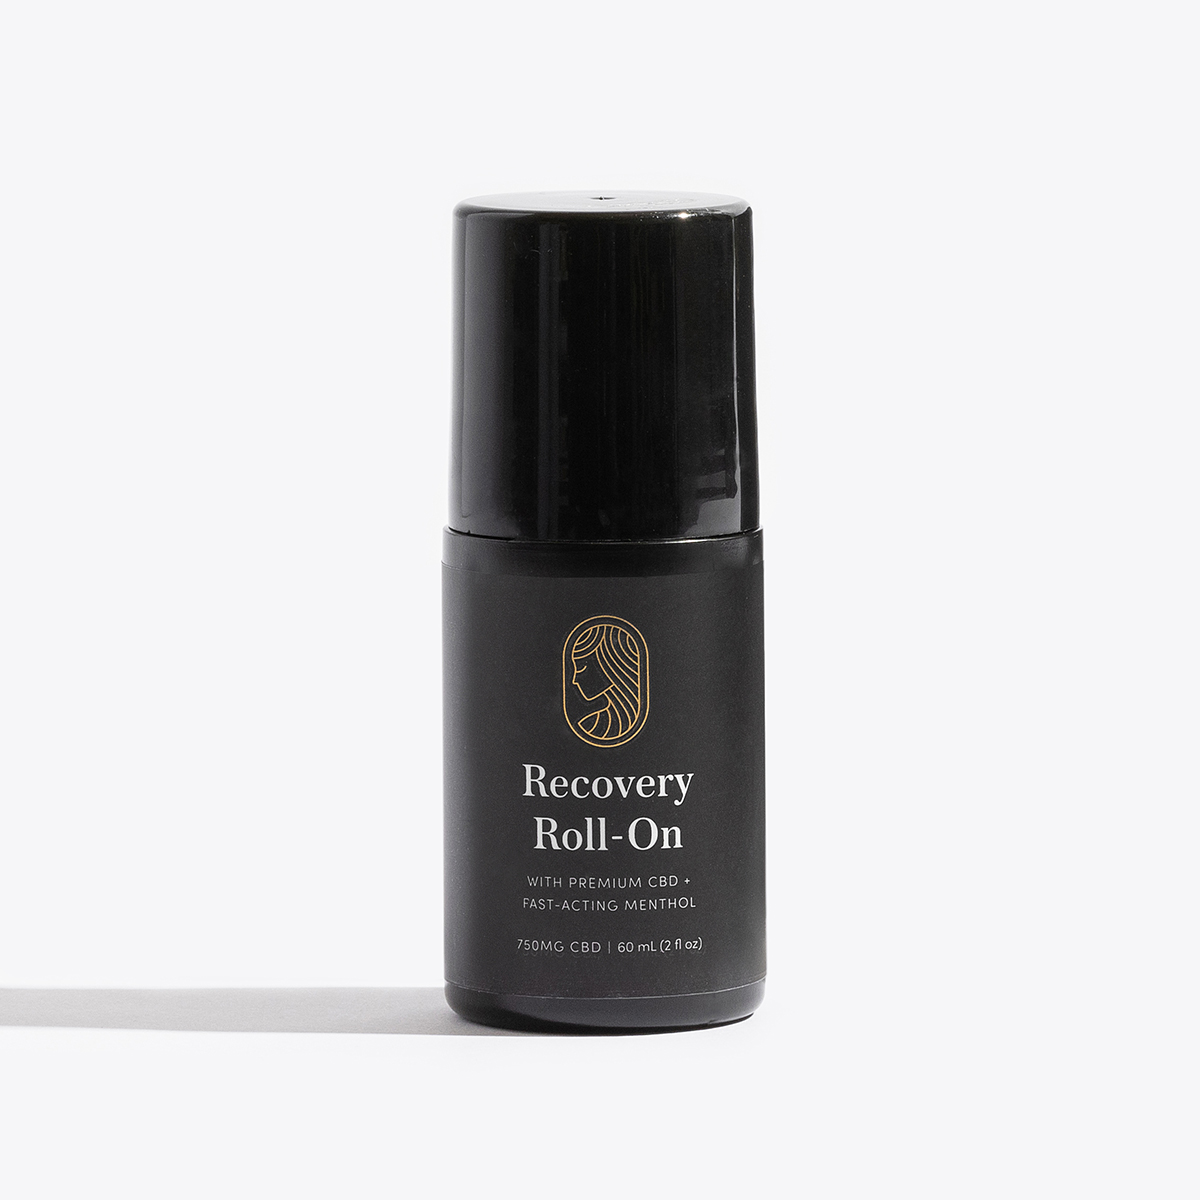 Black Recovery Roll-On container with strong shadow on white background.